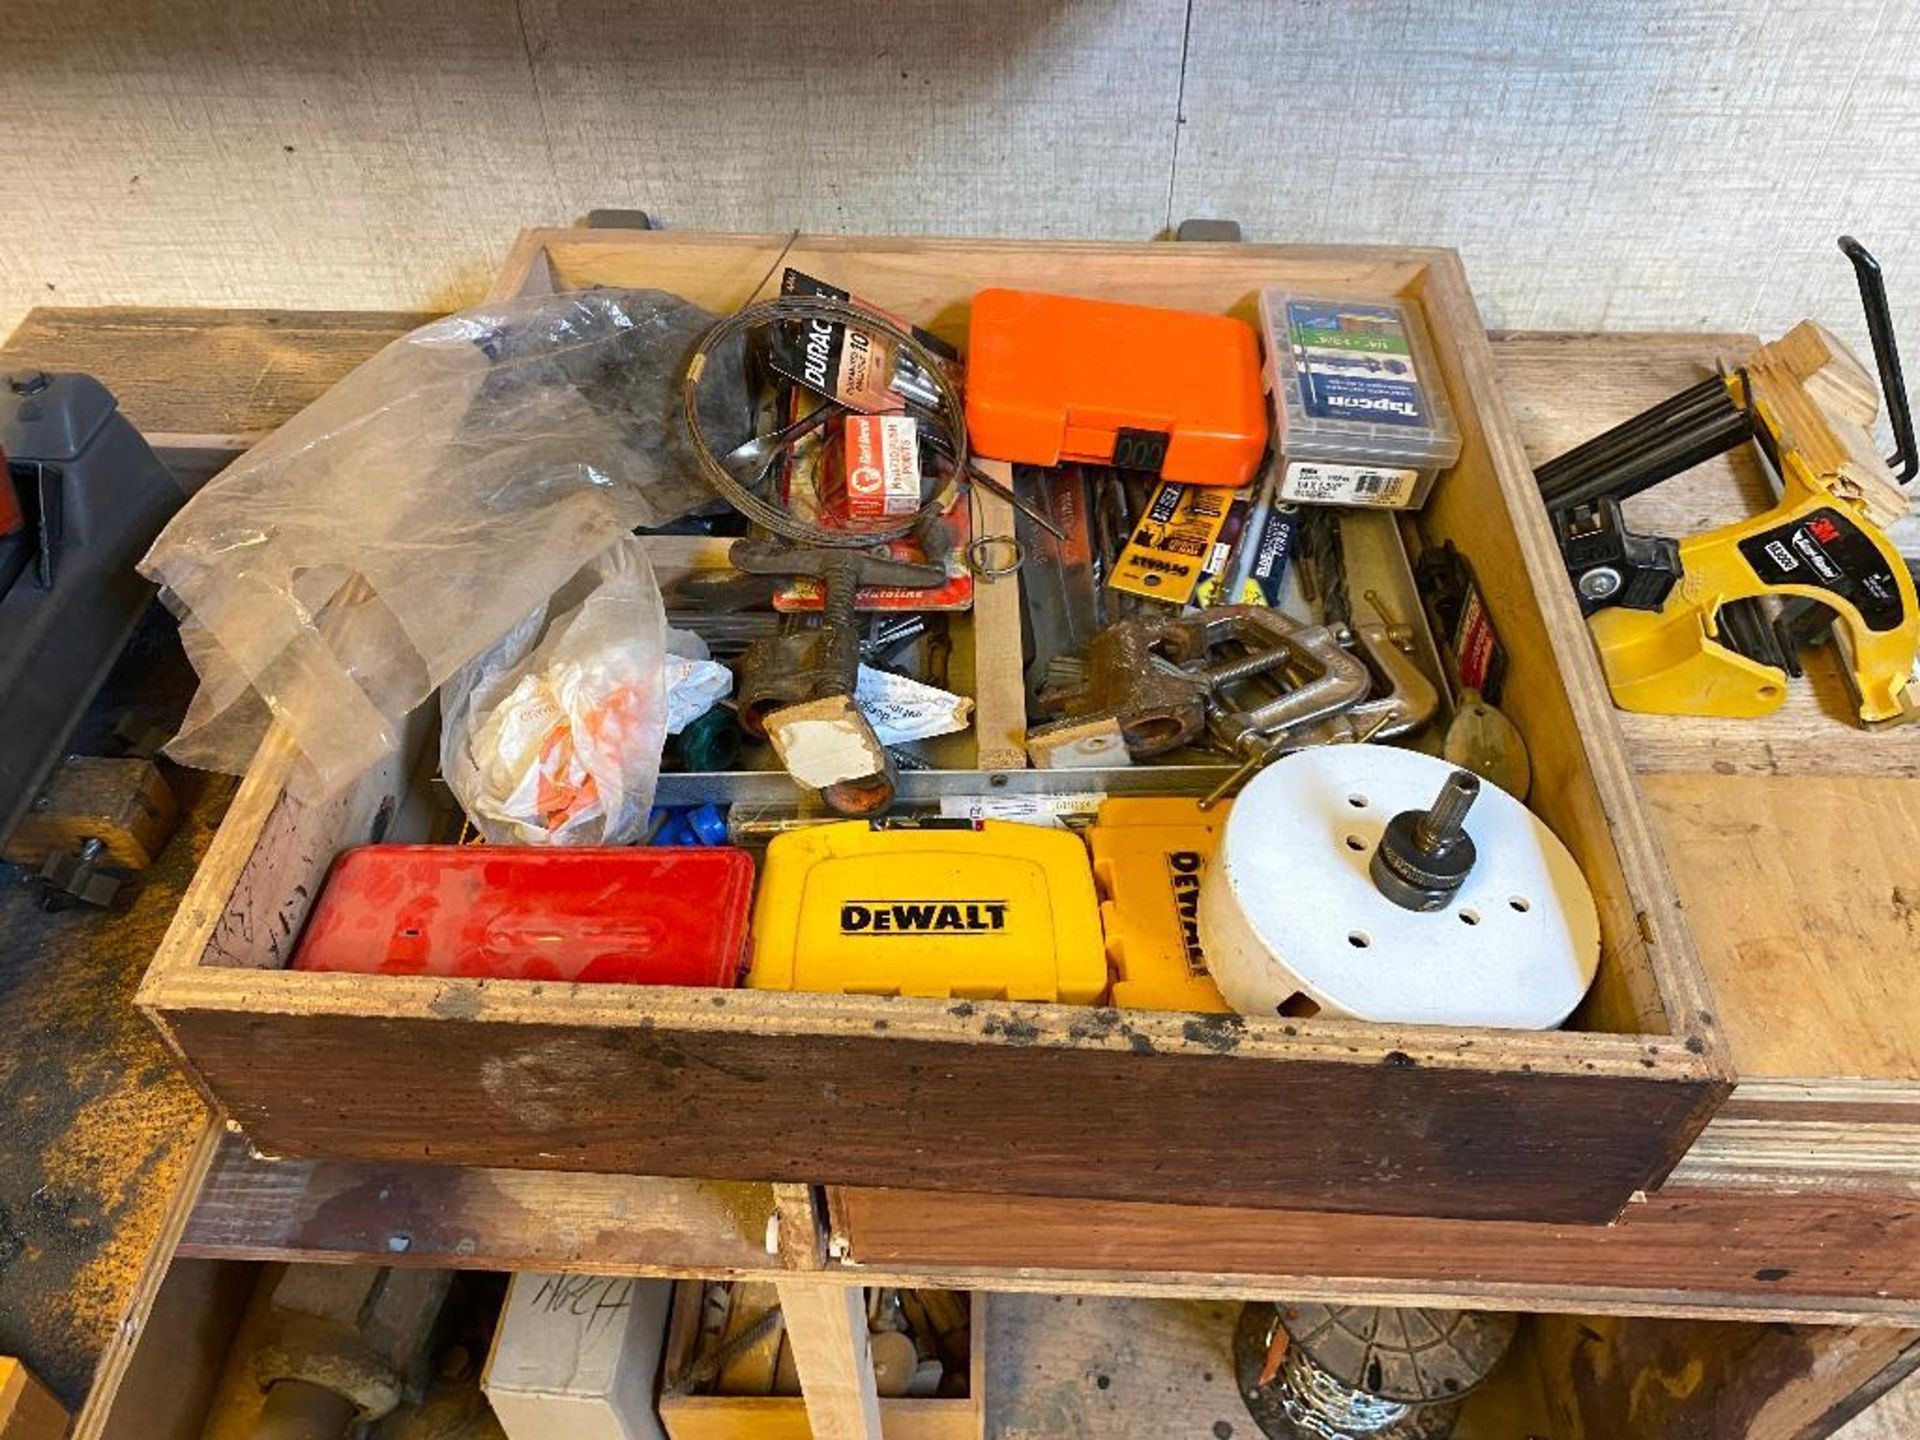 Lot of Tools including Cut-Off Saw, Bench Vise, Clamps, Bits, Hole Saw, Chain, Snips, etc. - Image 7 of 9